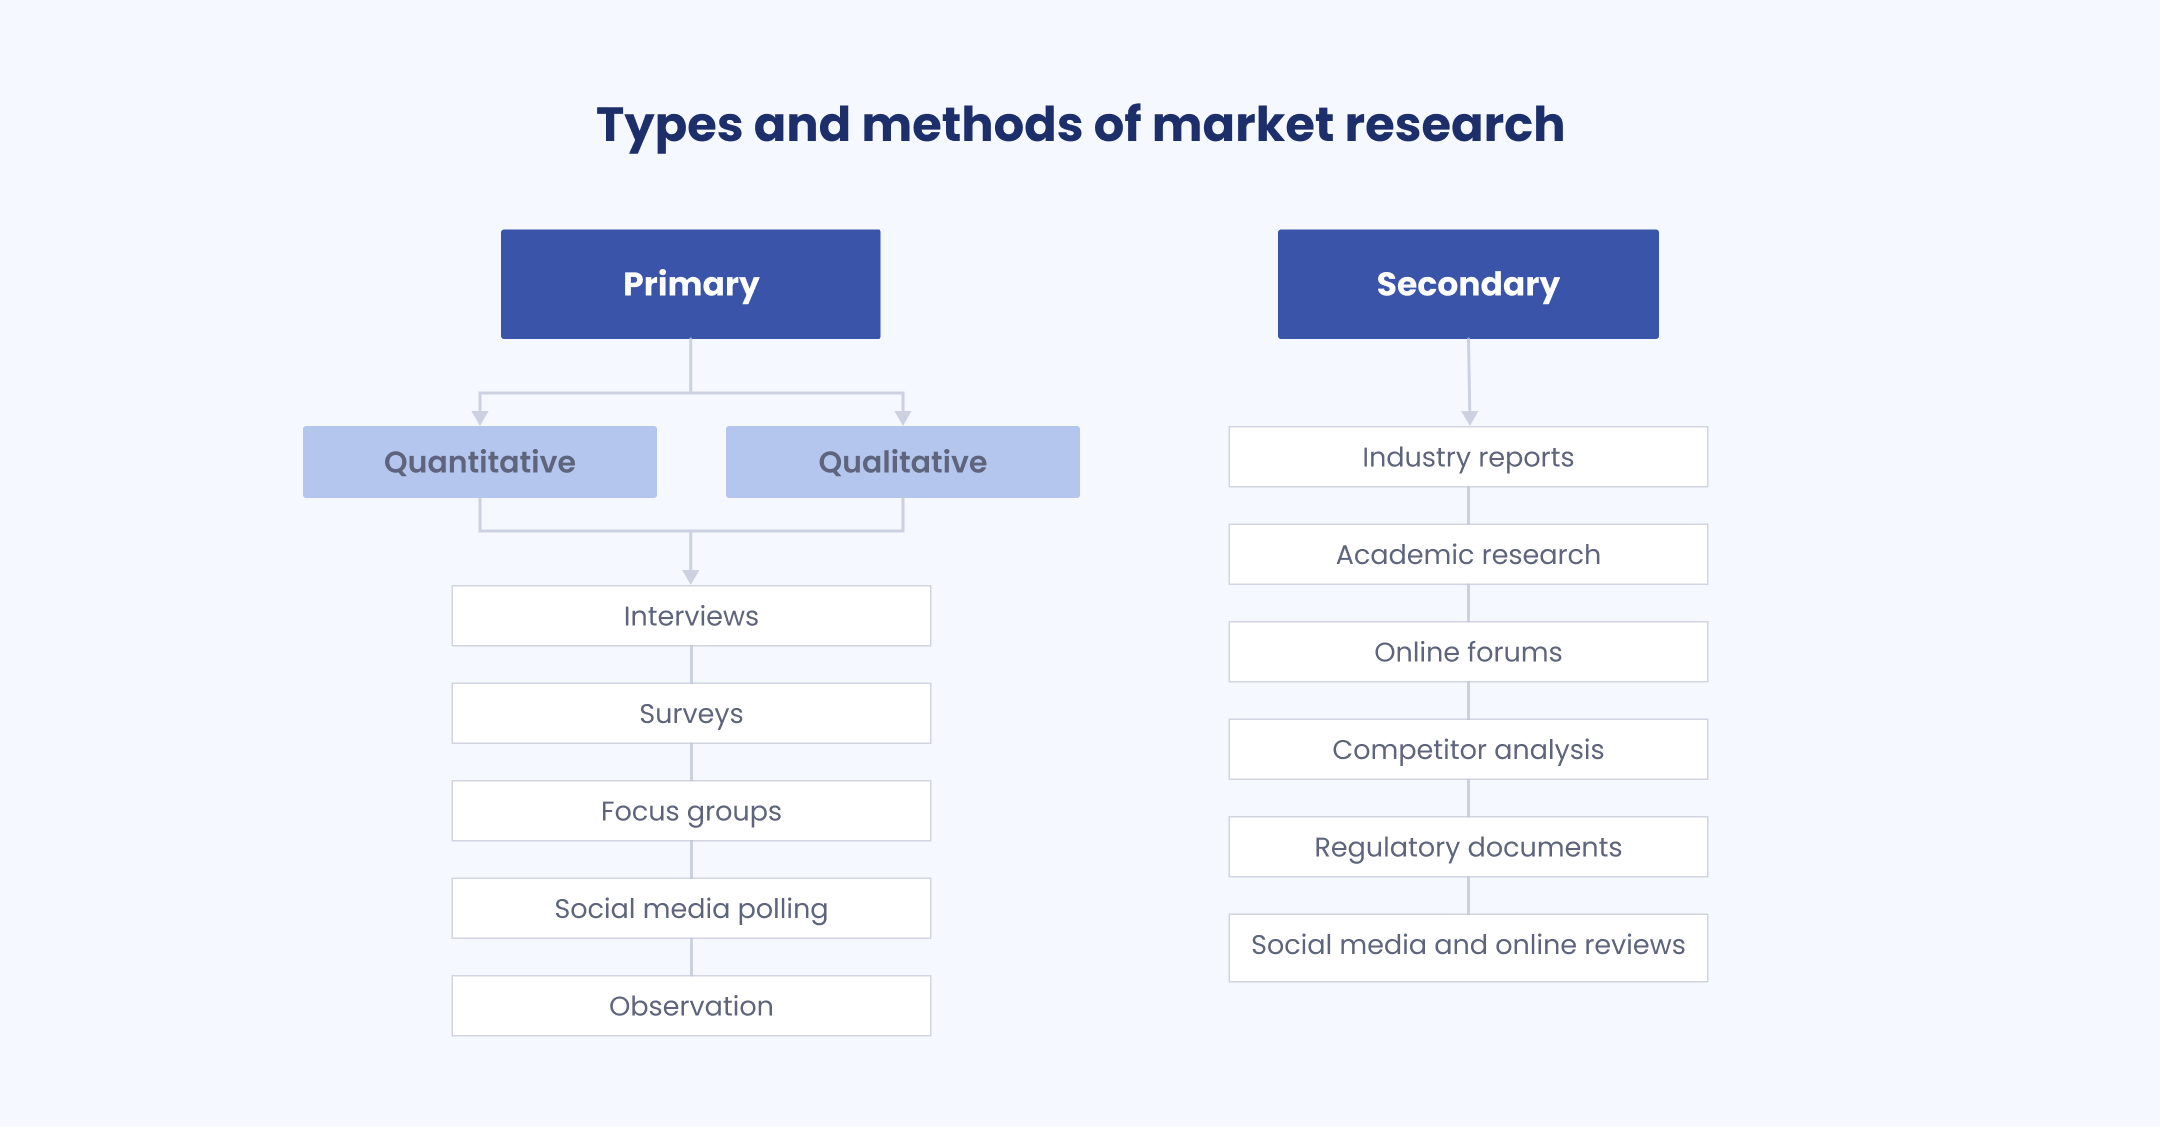 Ways to conduct market research